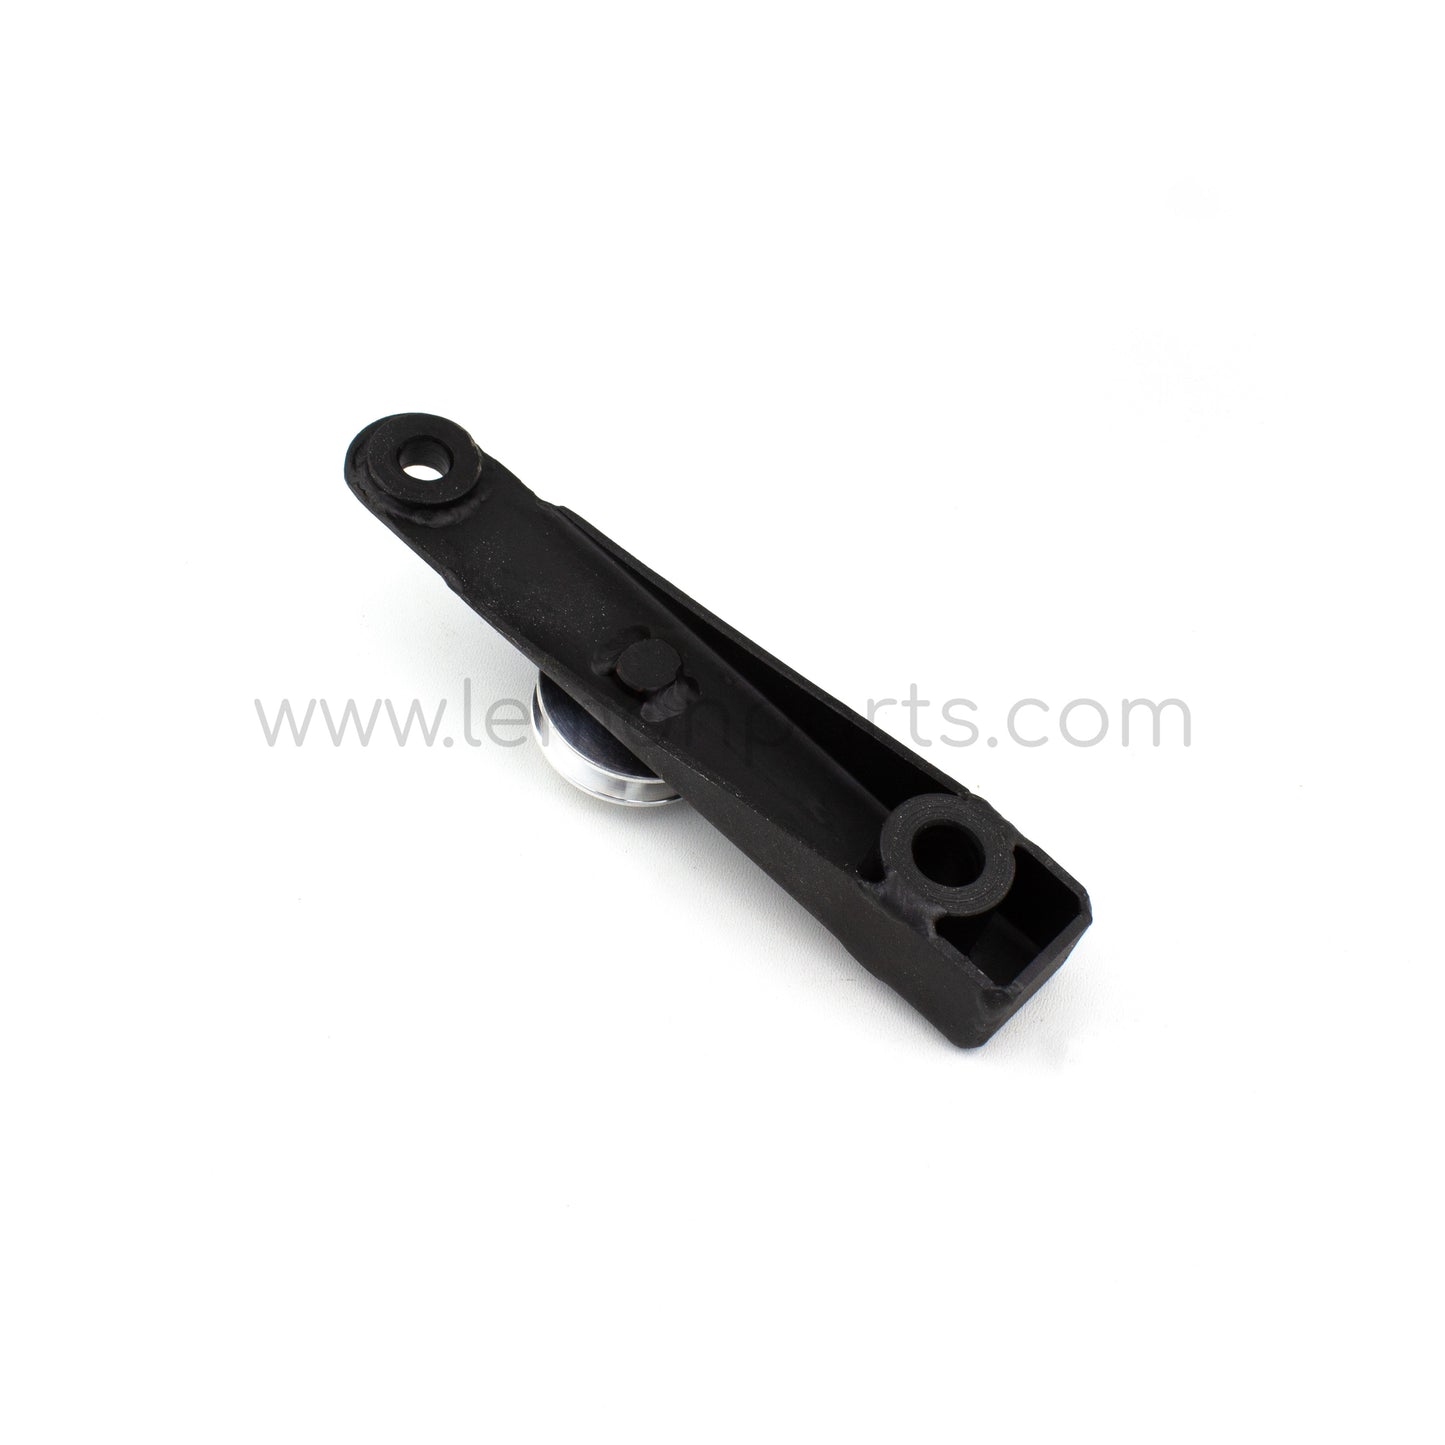 Handbrake chassis cable lever assembly for Ferrari 250